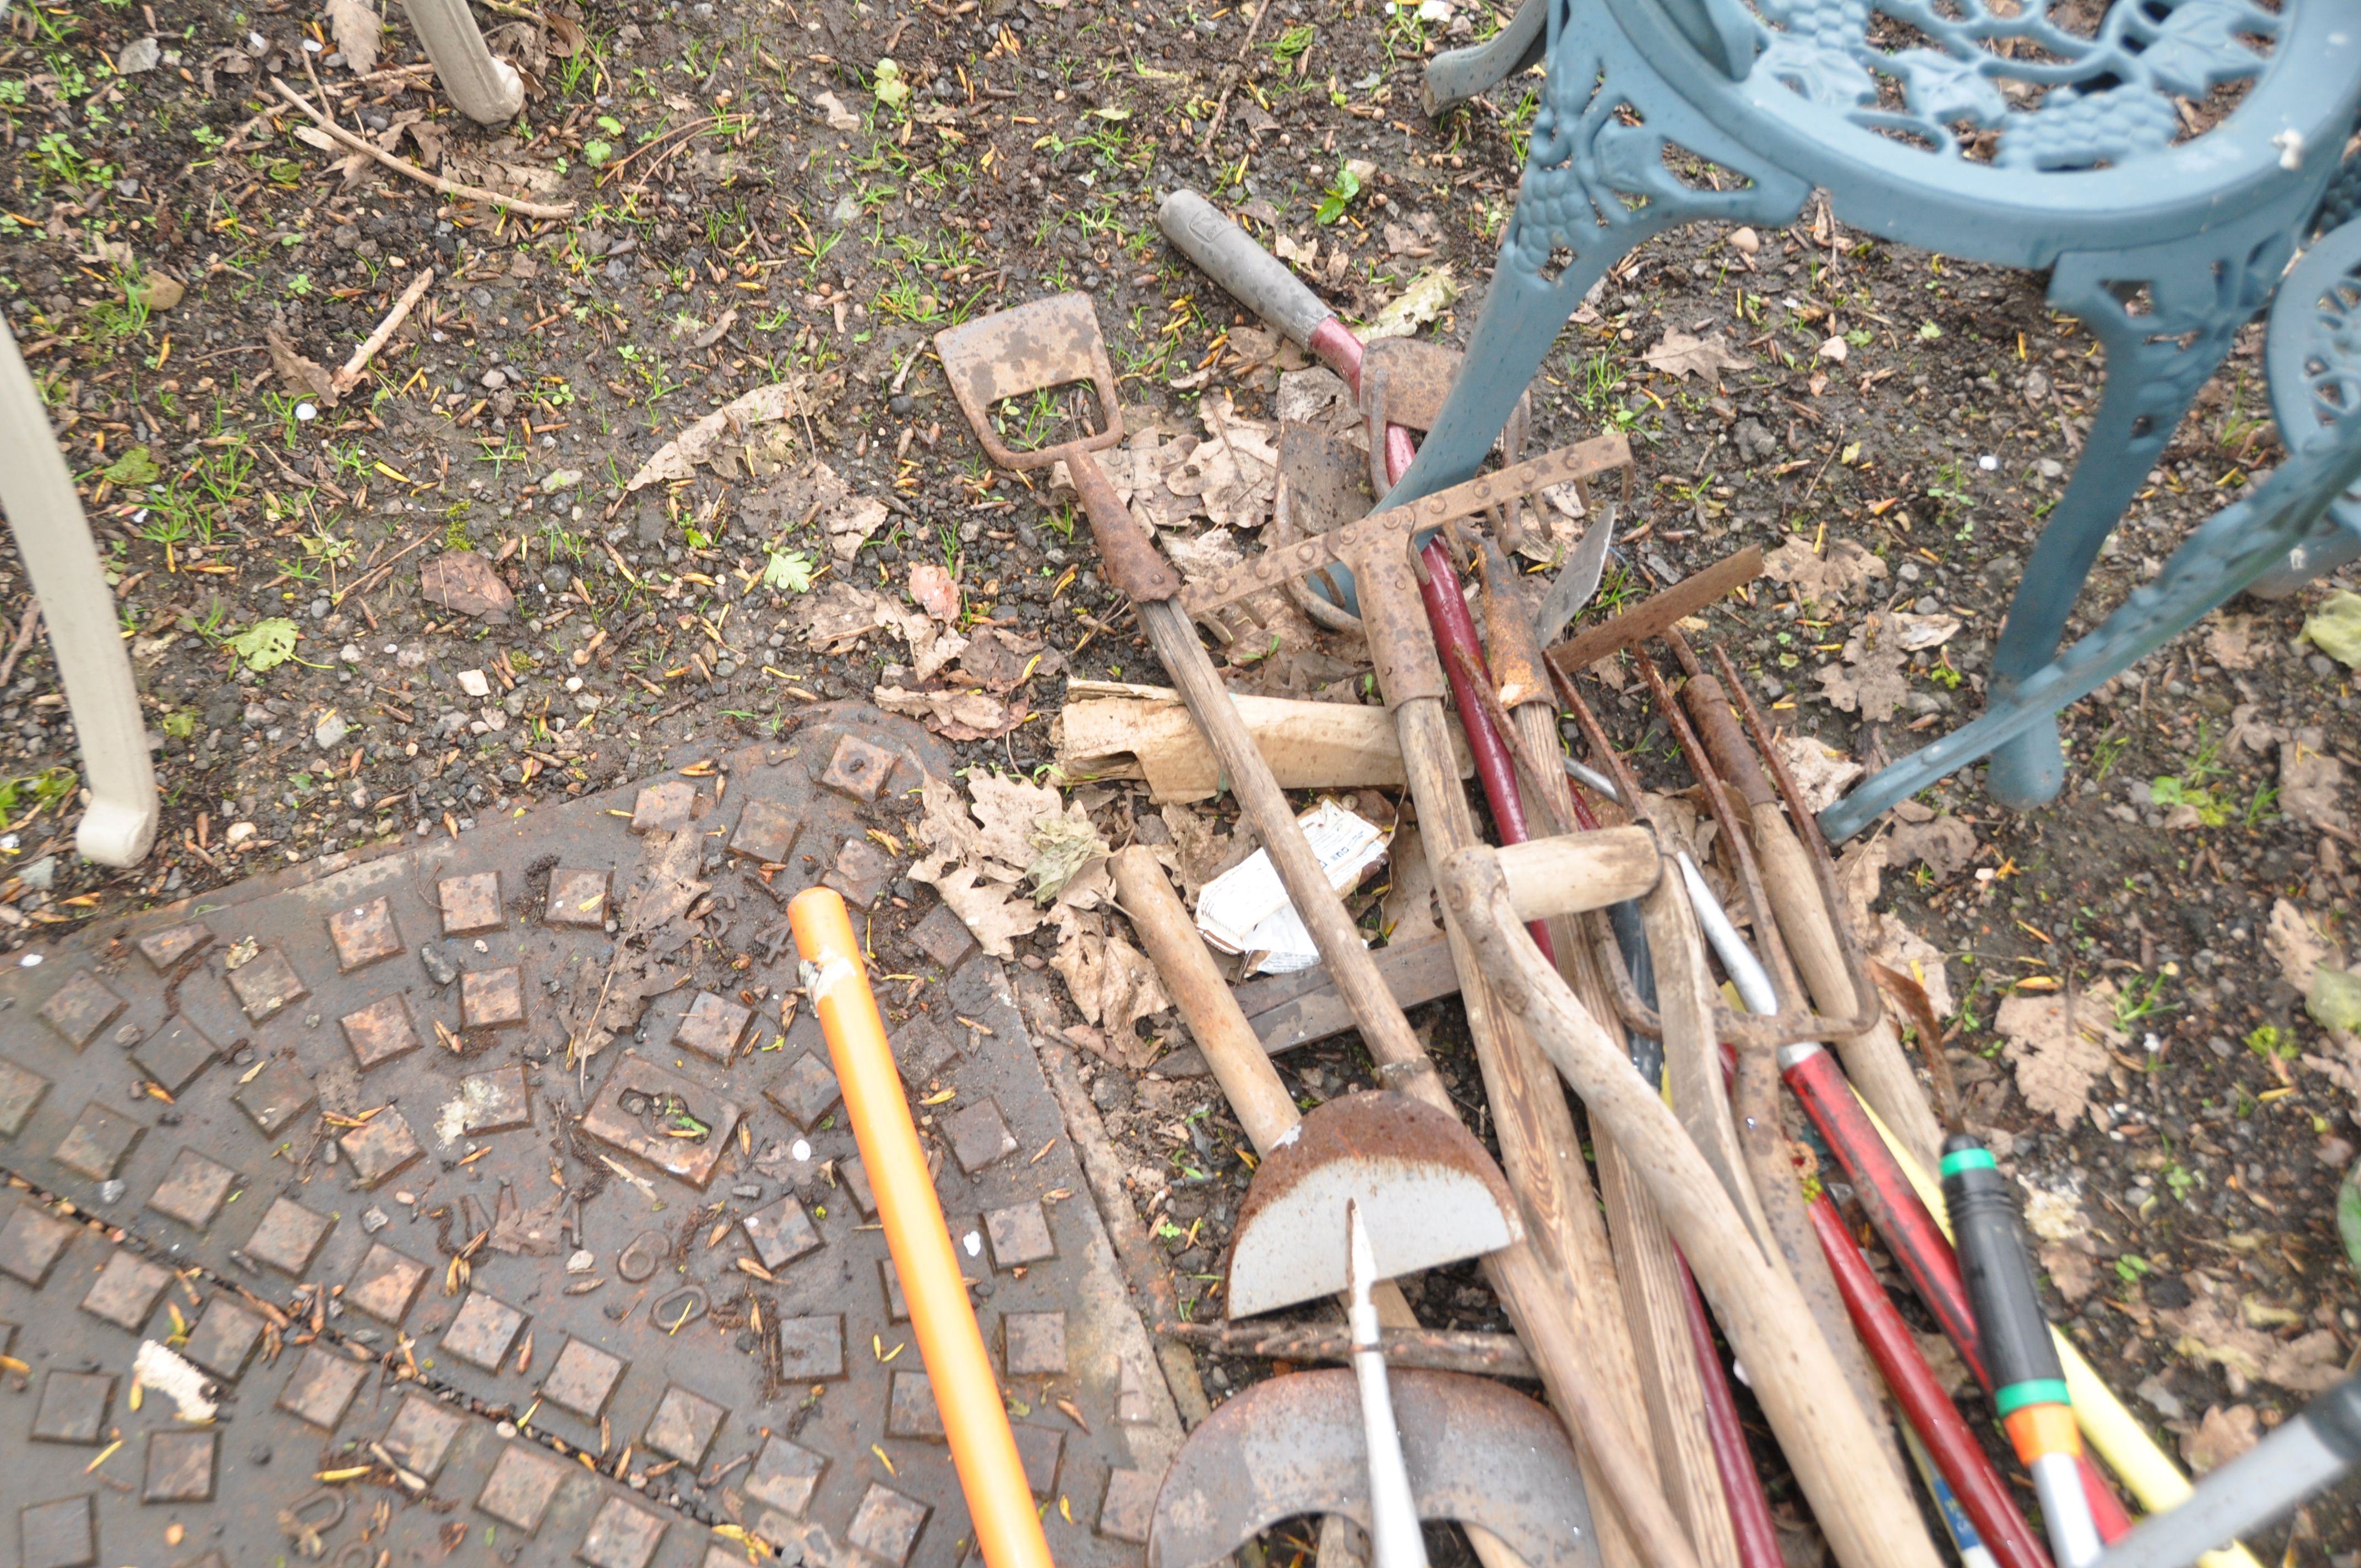 A COLLECTION OF GARDEN TOOLS including forks, rakes, spades, shovels etc (15+) - Image 2 of 2